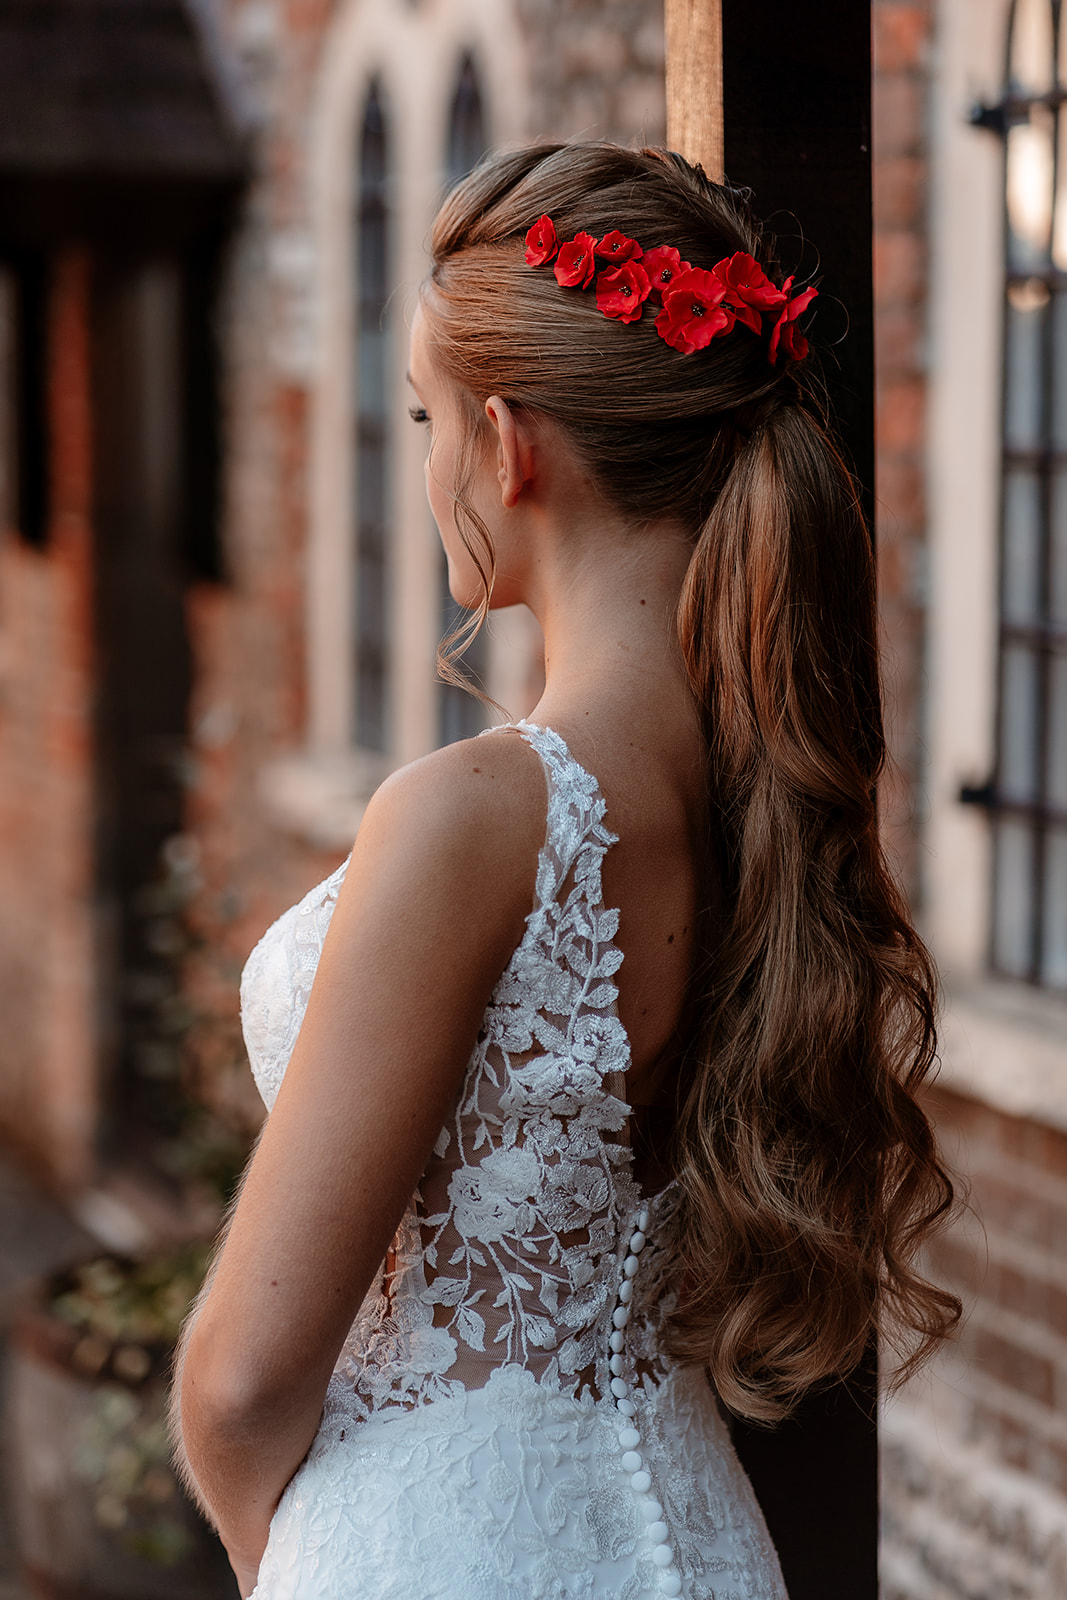 Back view of a bride in a lace wedding dress with red flowers in her ponytail. 